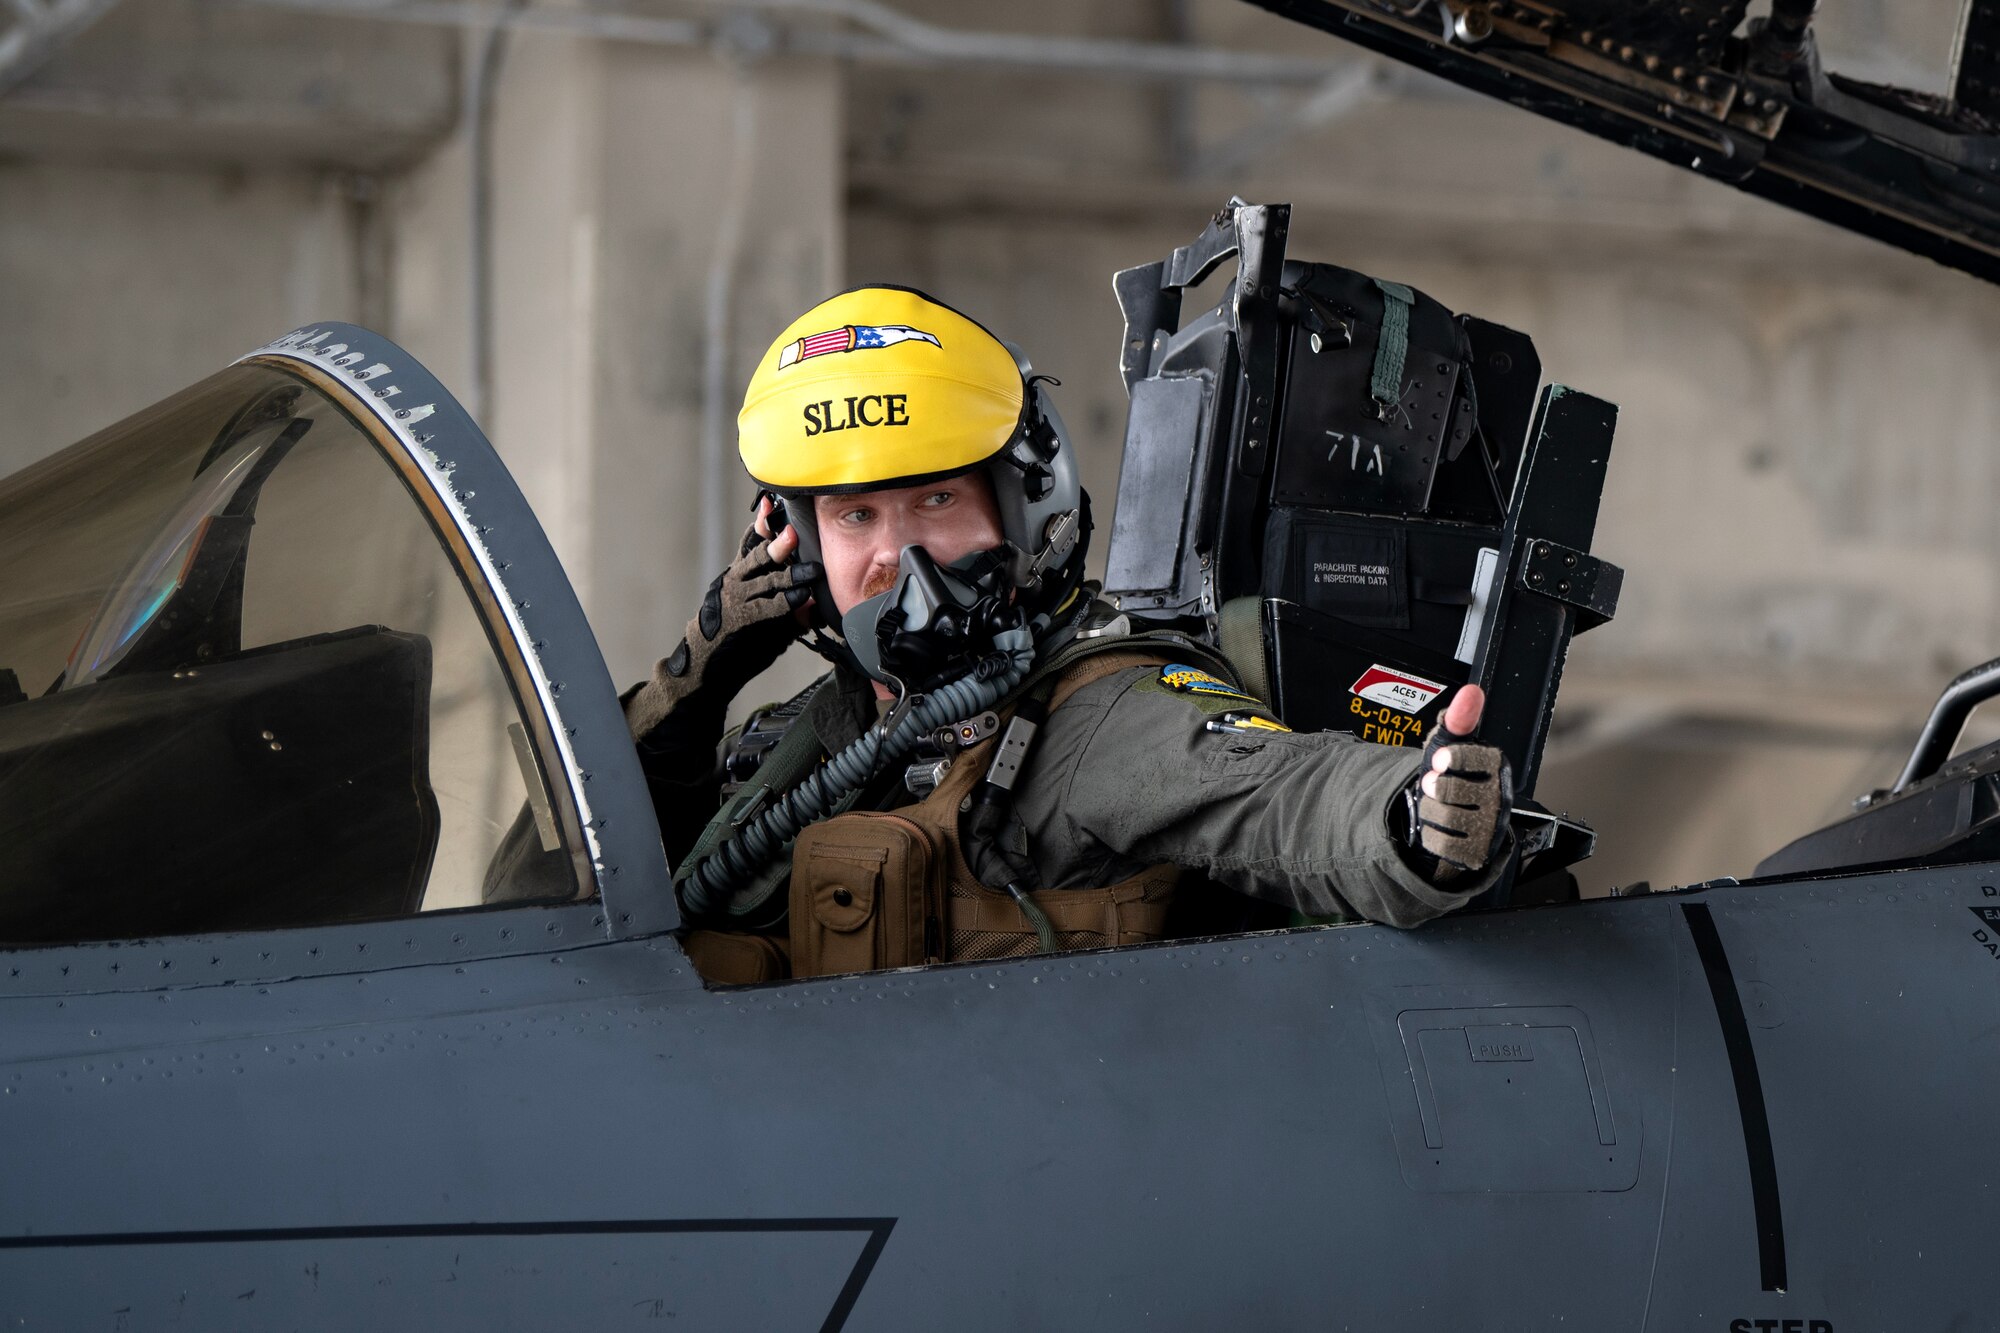 U.S. Air Force Capt. Michael Gilmartin, an F-15E Strike Eagle pilot assigned to the 336th Fighter Squadron, Seymour Johnson Air Force Base, North Carolina, signals to ground crew members at Kadena Air Base, Japan, Aug. 11, 2023. Kadena is committed to providing world-class support to strengthen regional alliances and partnerships, as well as U.S. forces’ readiness to respond when called upon. (U.S. Air Force photo by Staff. Sgt. Jessi Roth)